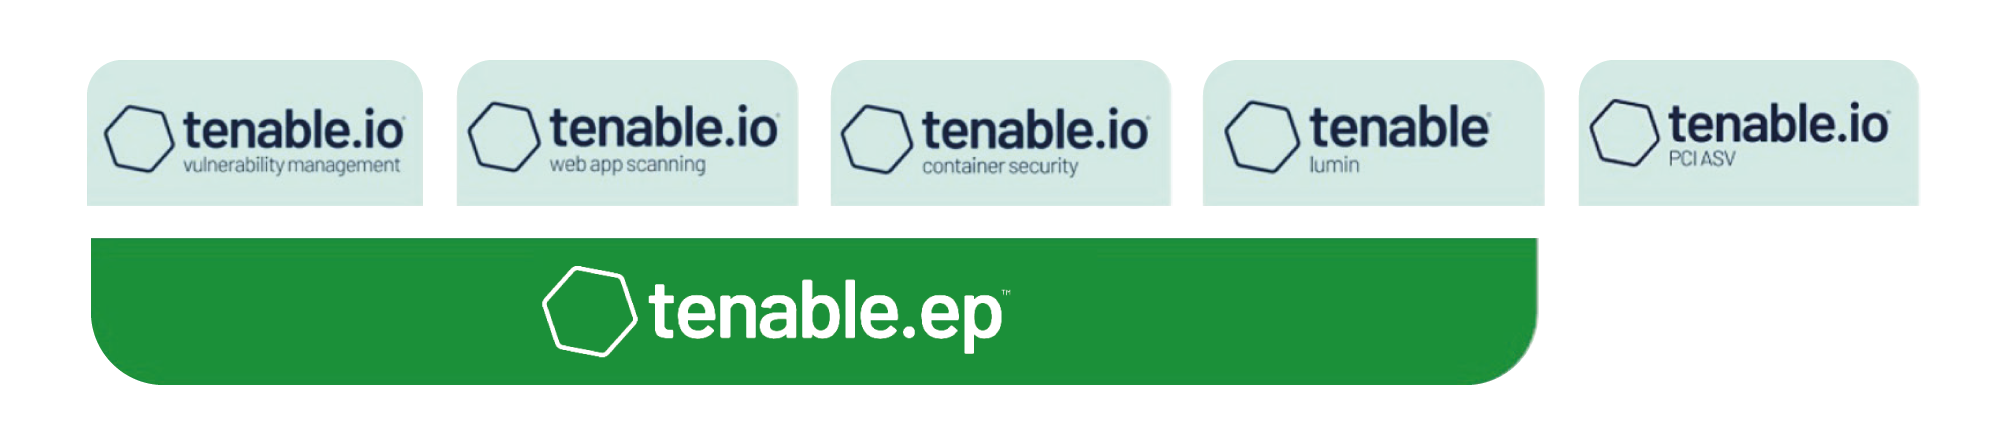 Managed Vulnerability Scanning | Tenable